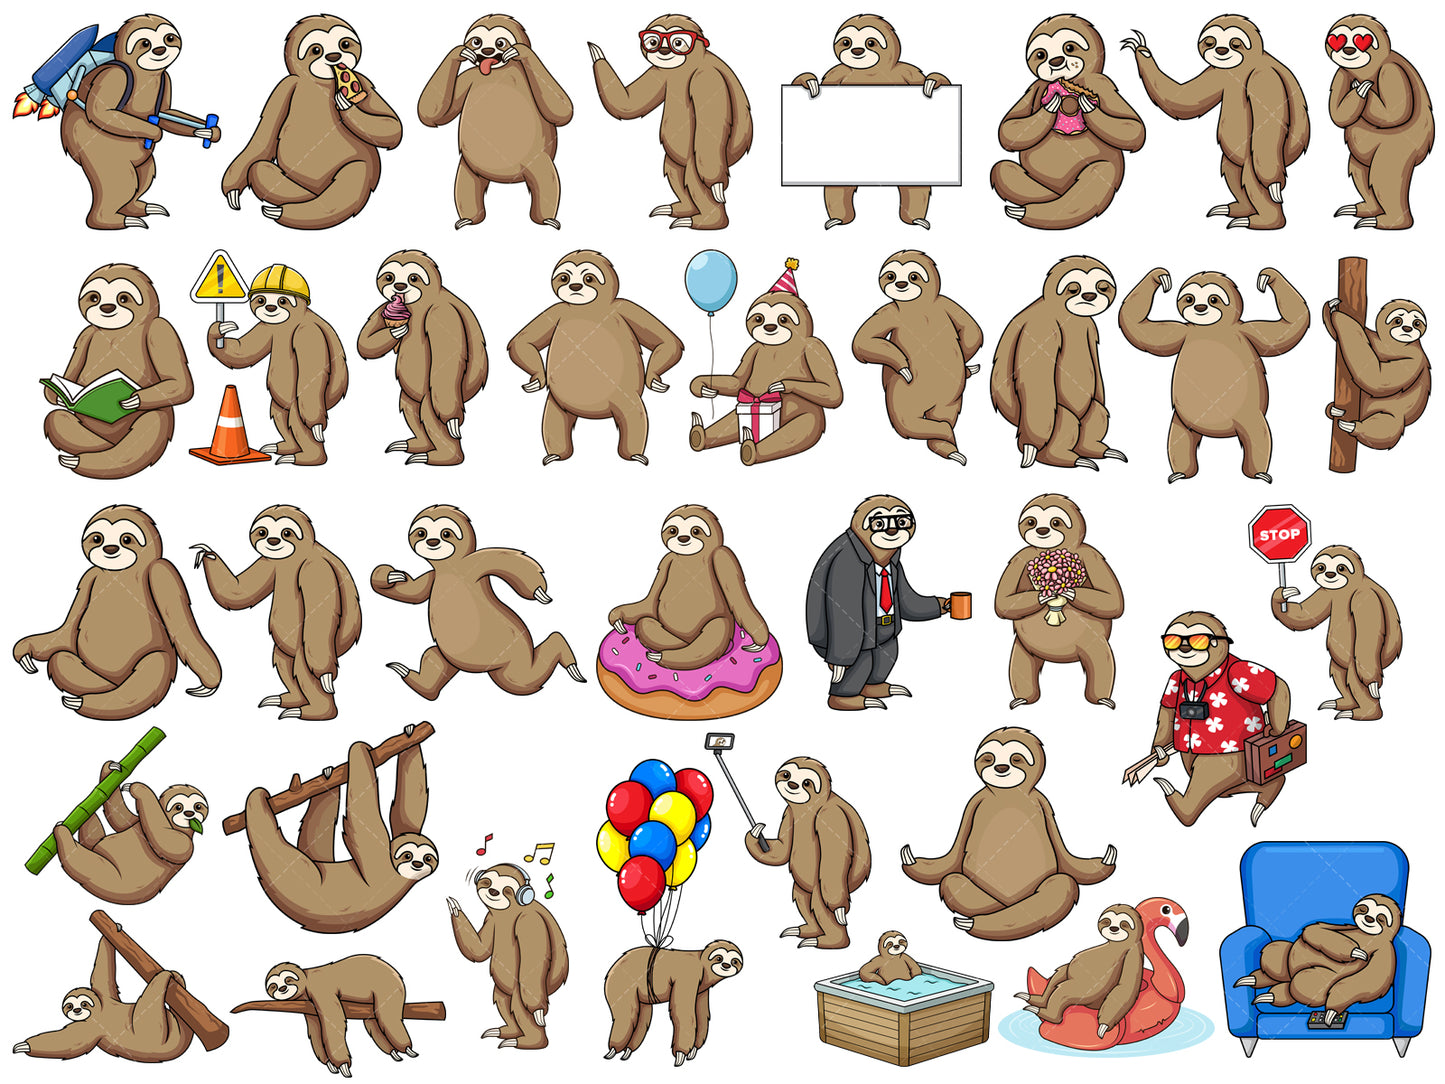 A bundle of 36 royalty-free stock vector illustrations of a cartoon sloth character.